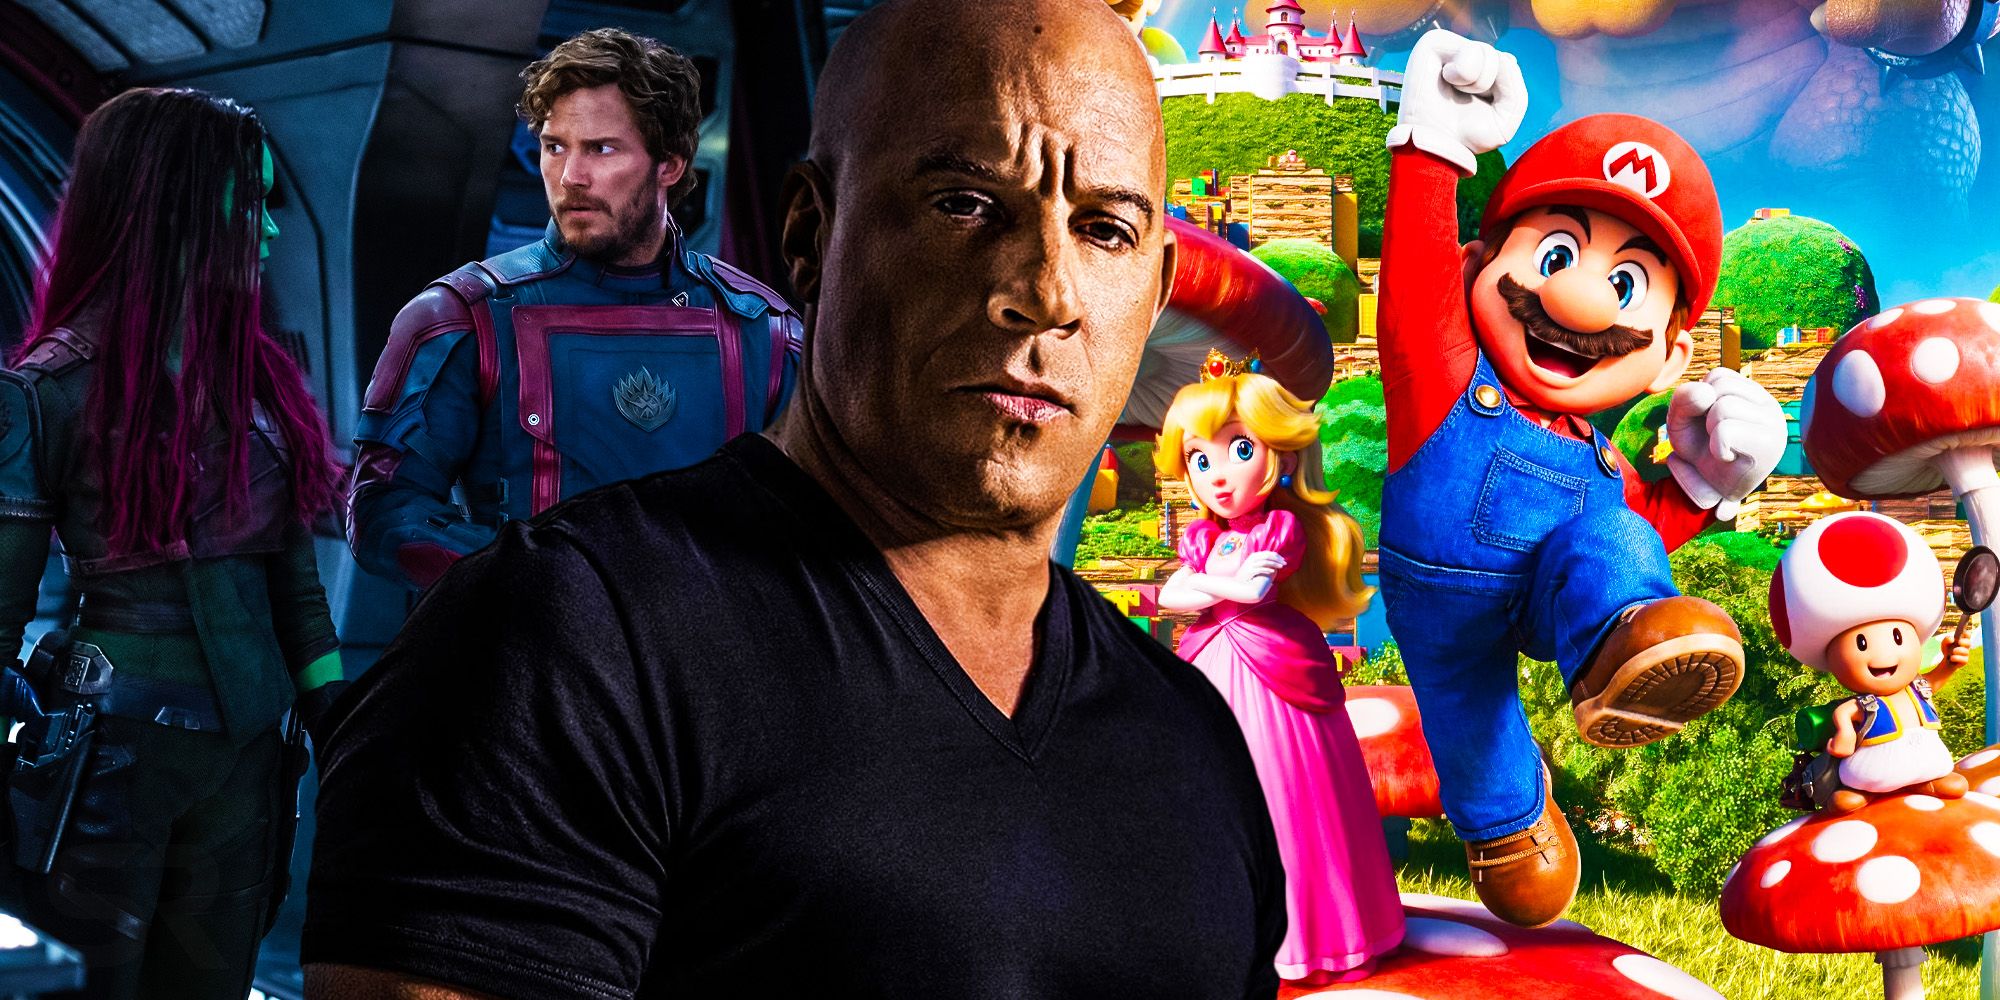 Vin diesel fast and furious 9 super mario bros guardians of the galaxy vol 3